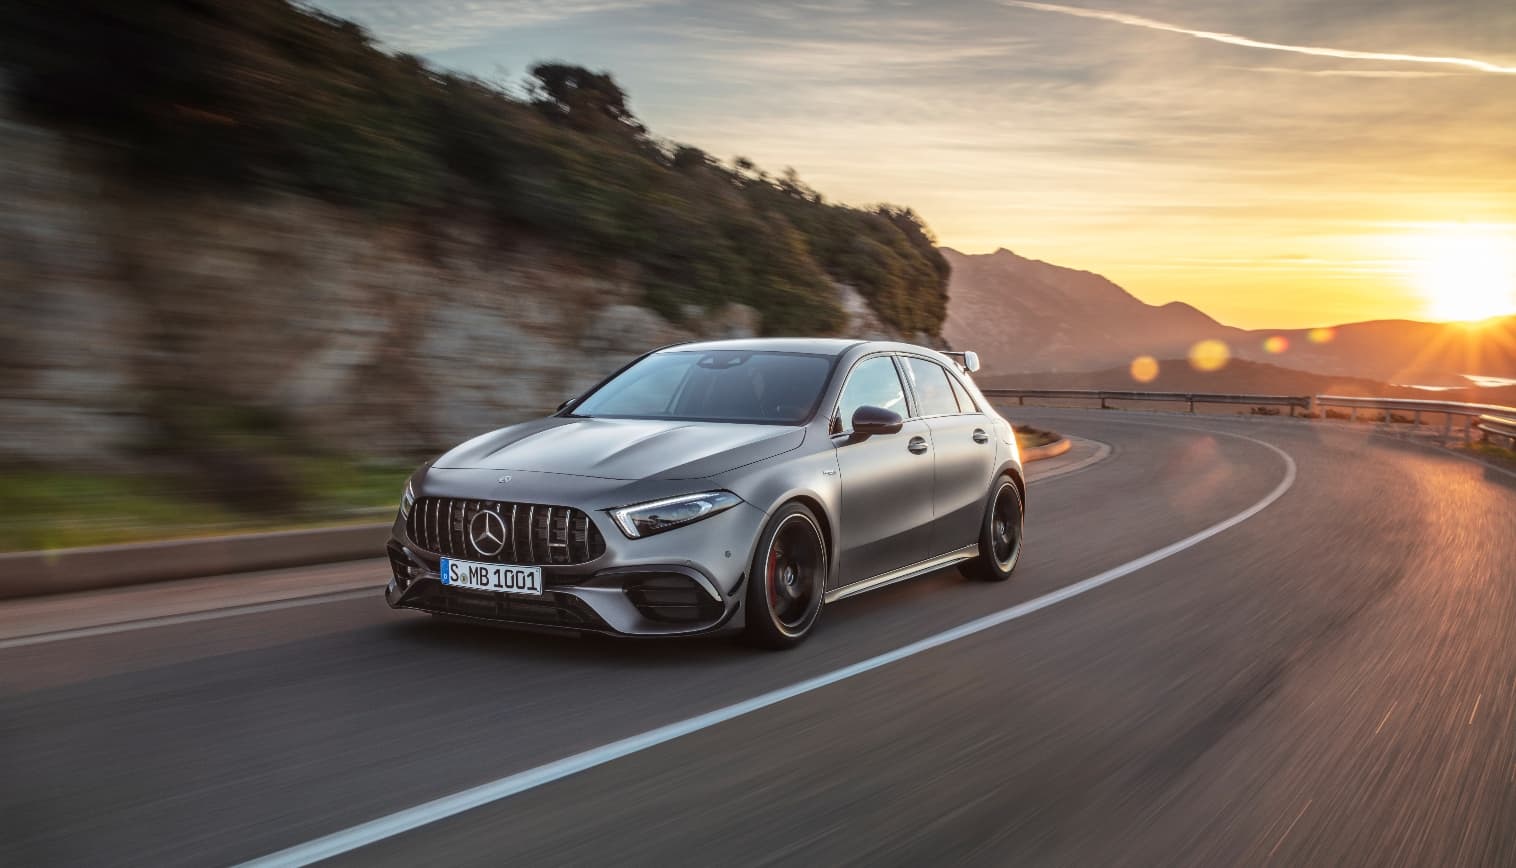 Mercedes-AMG A45 S Launched in India - Priced at Rs 79.5 Lakh|A45 ss 5||A45 s 2|